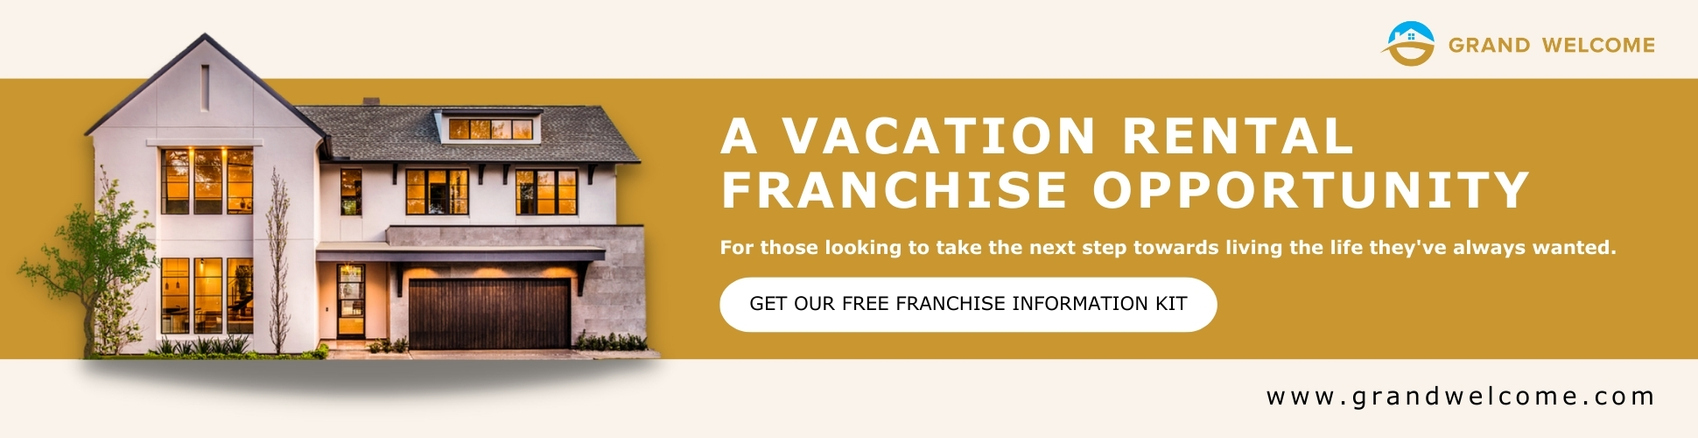 Grand Welcome Vacation Rental Franchise